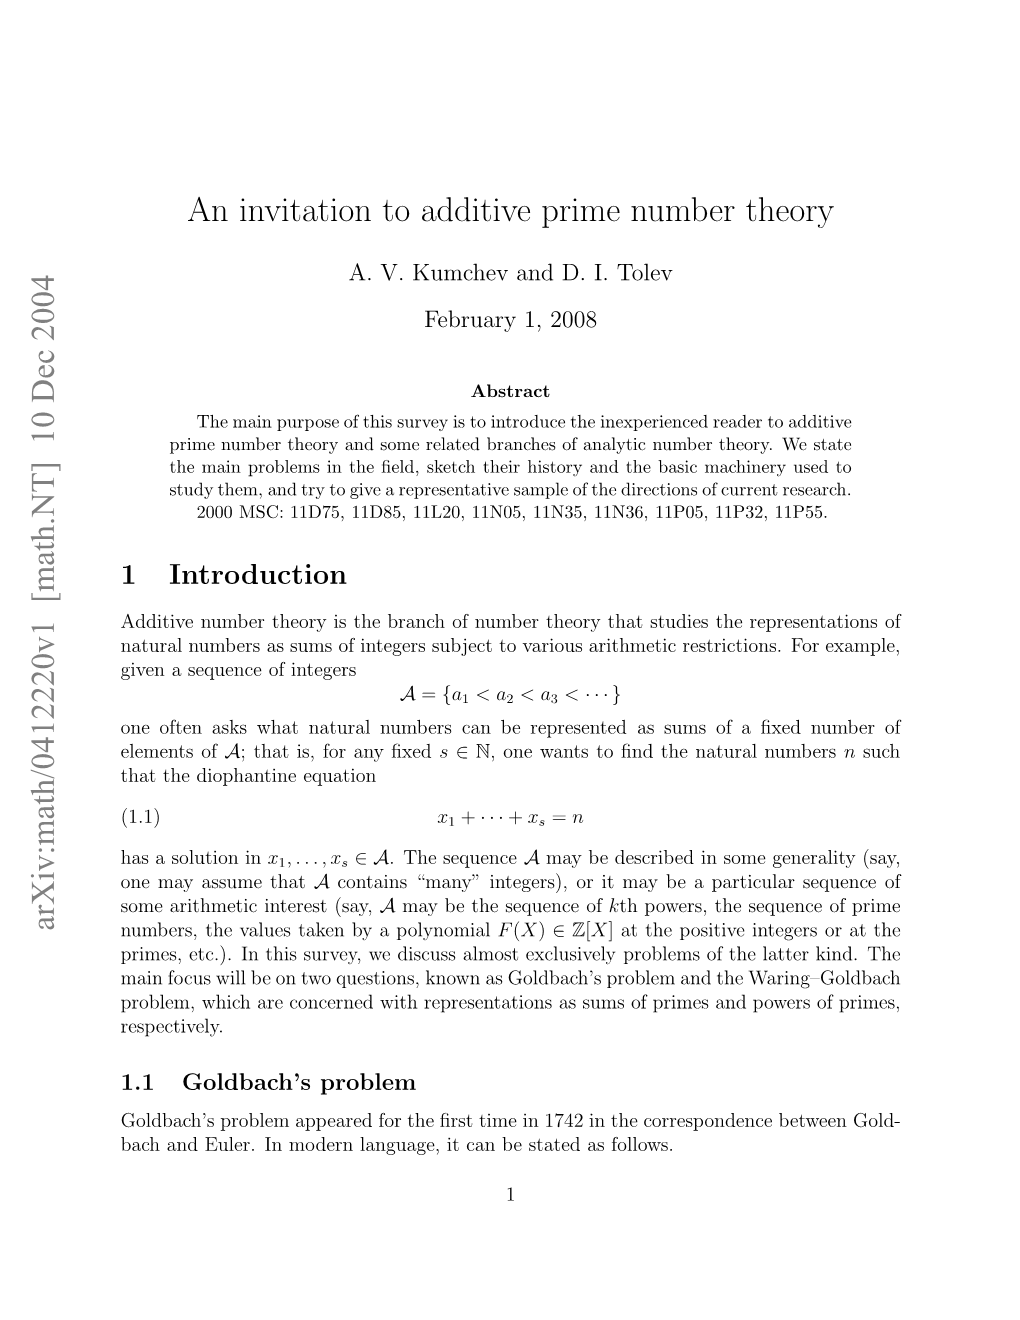 [Math.NT] 10 Dec 2004 an Invitation to Additive Prime Number Theory